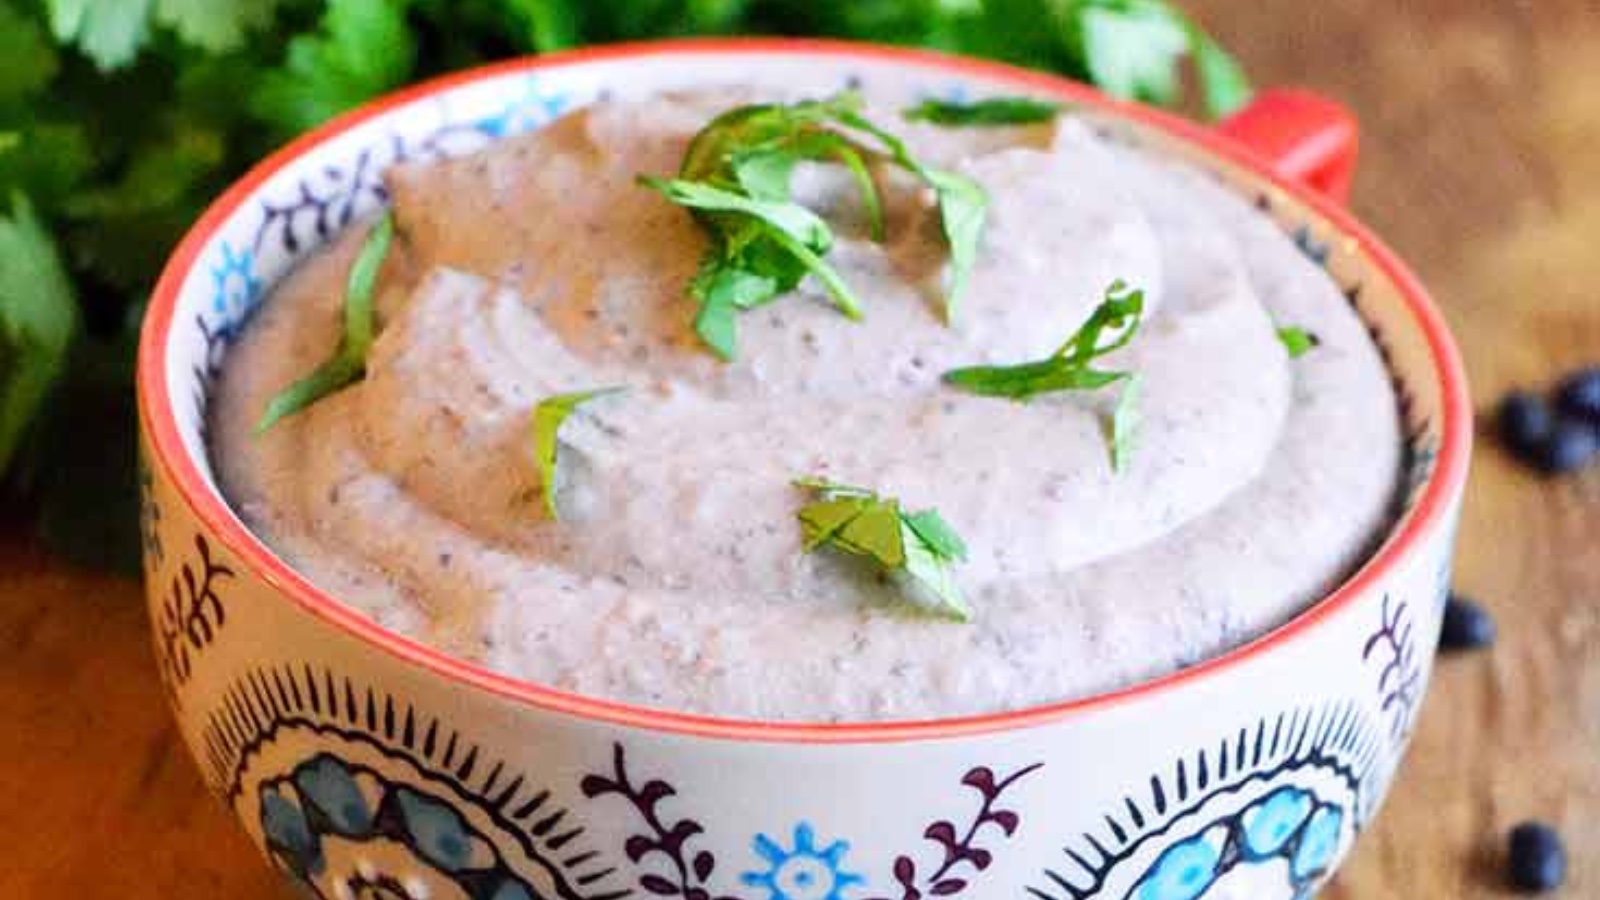 A decorative bowl filled with black bean hummus and garnished with fresh, chopped herbs.